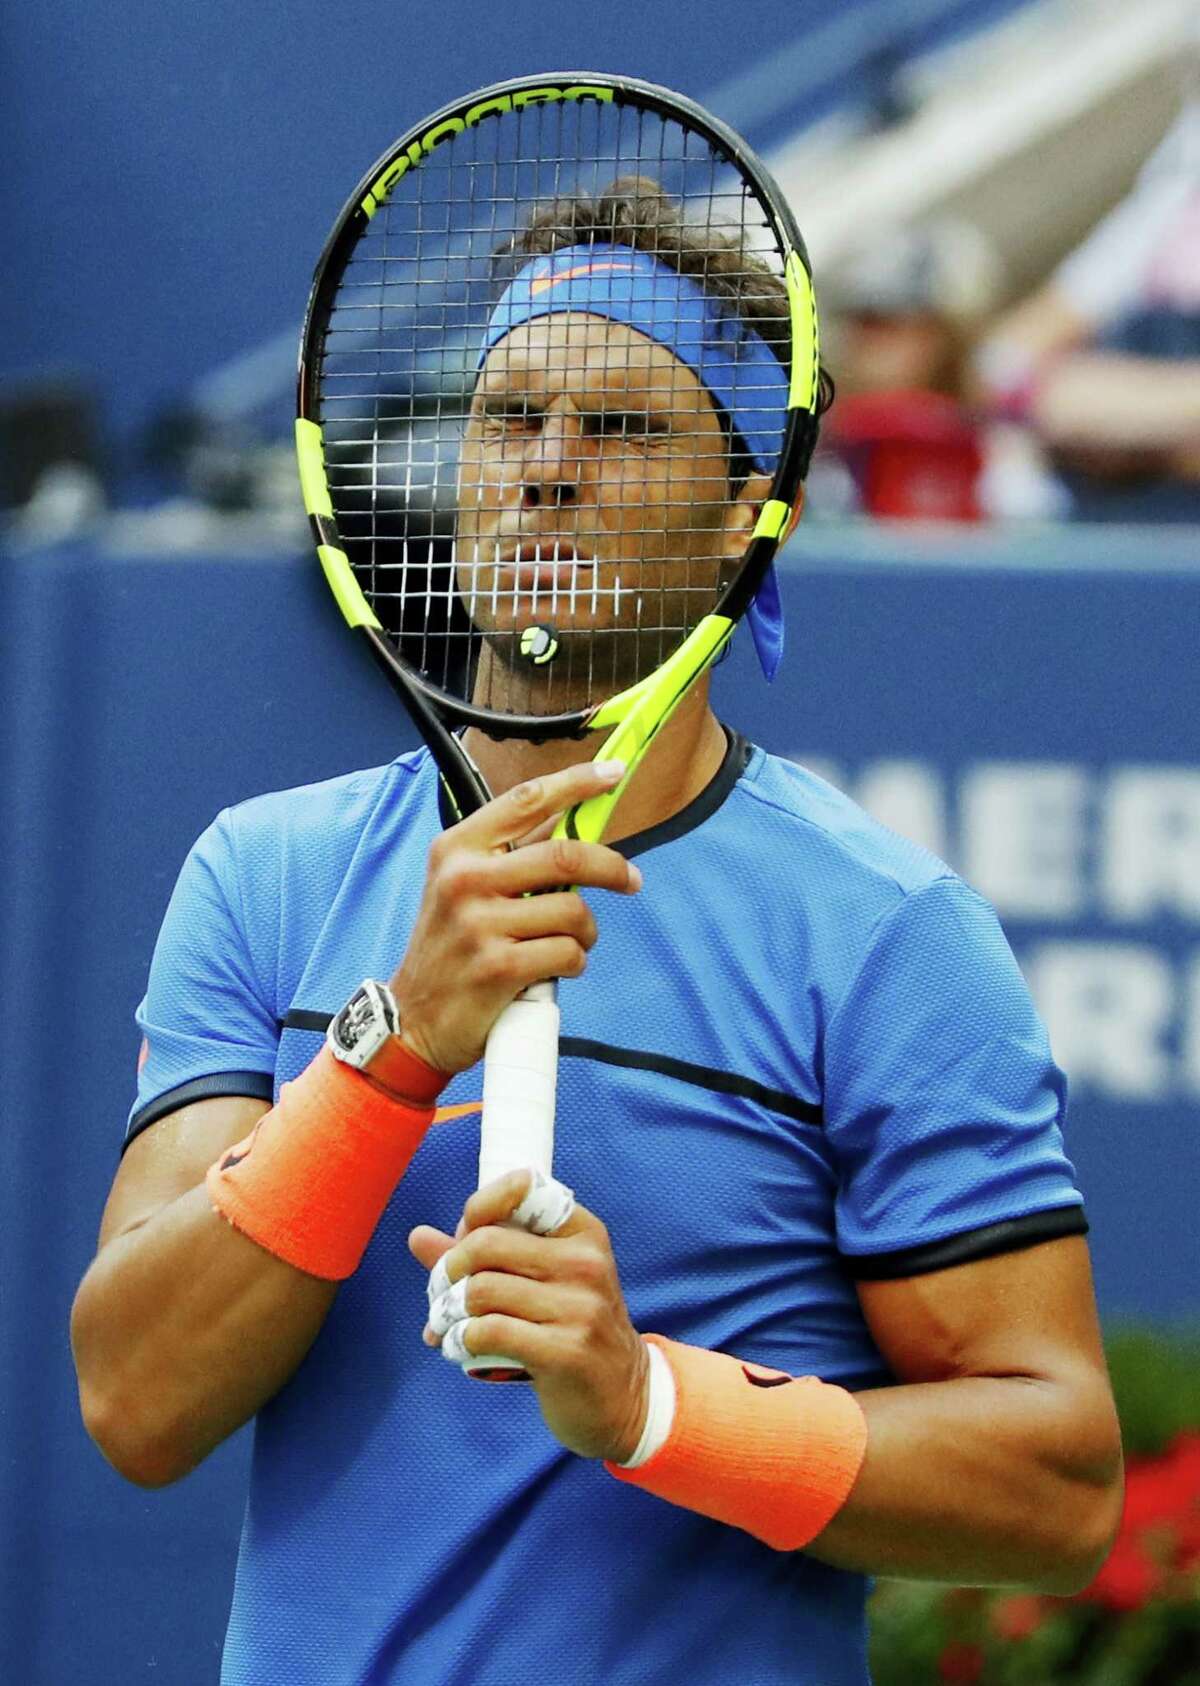 Rafael Nadal puts his racket to his face during his match against Lucas Pouille at the U.S. Open on Sunday.